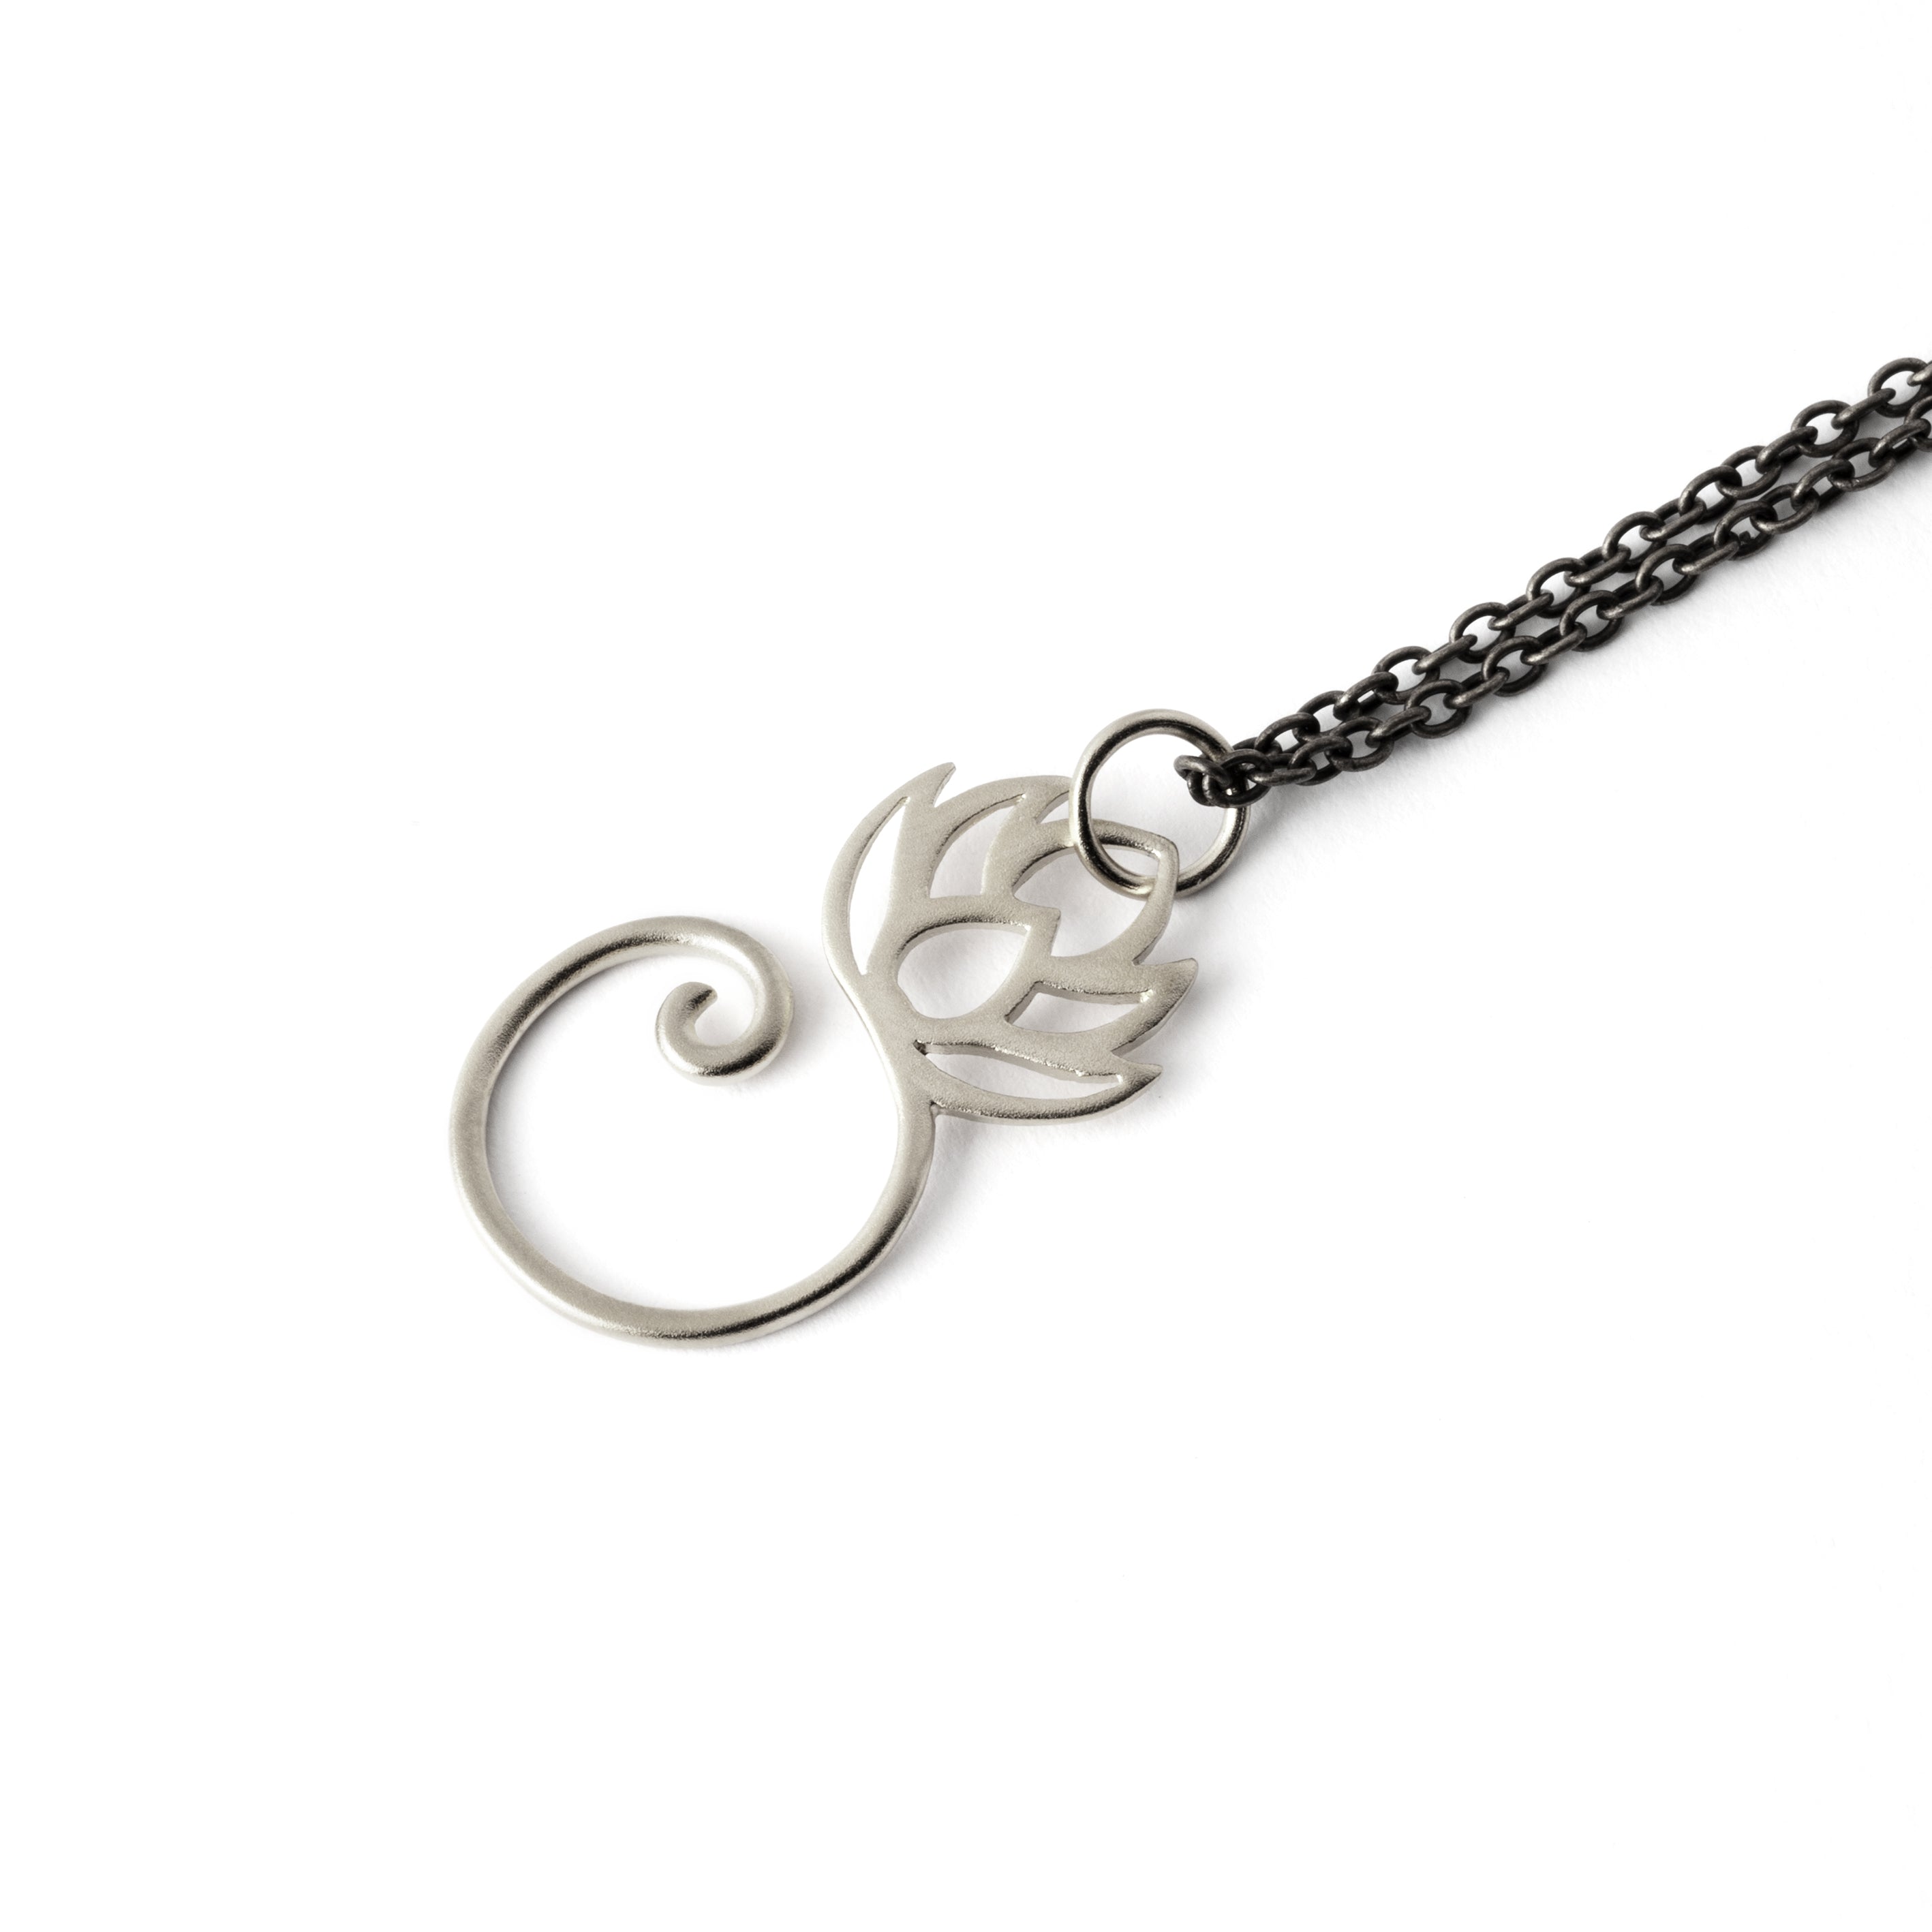 Spiralling Silver Lotus Charm necklace right side view